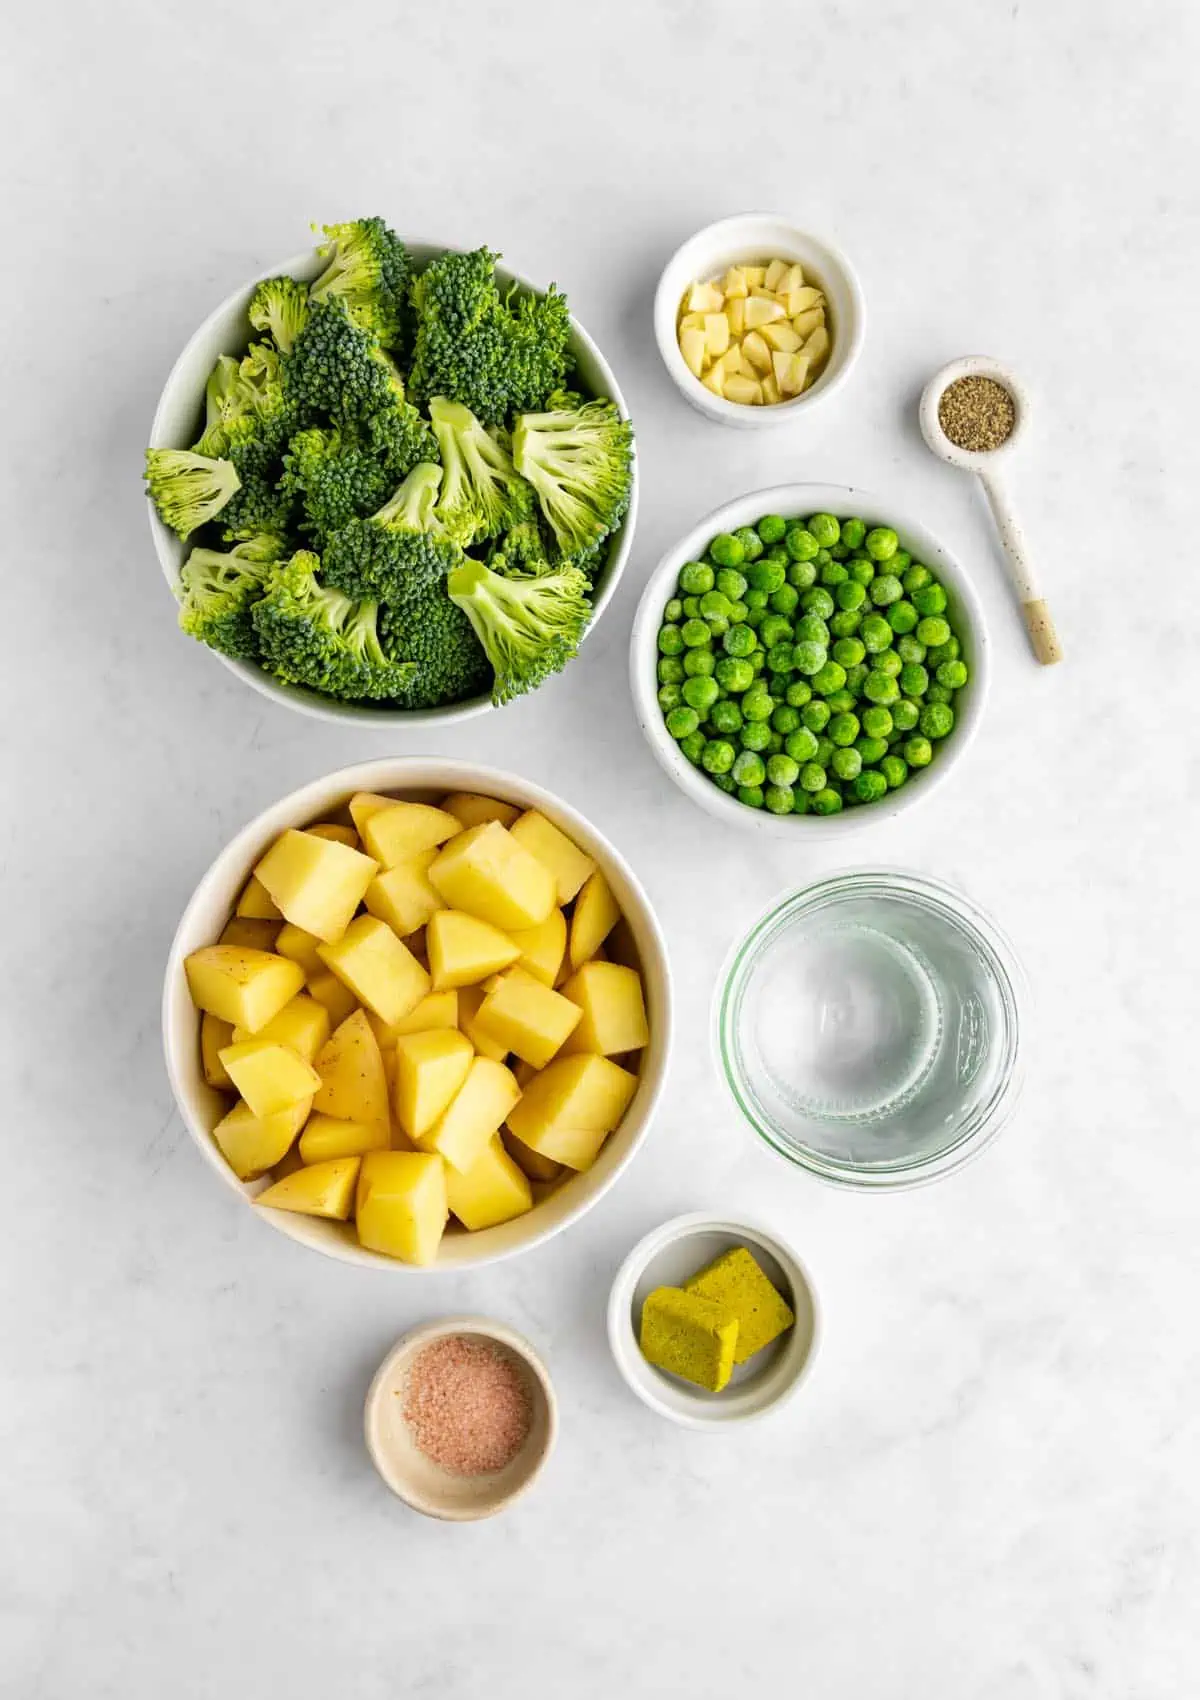 Flatlay photo of the green pea soup ingredients including frozen peas, broccoli, and potatoes. 